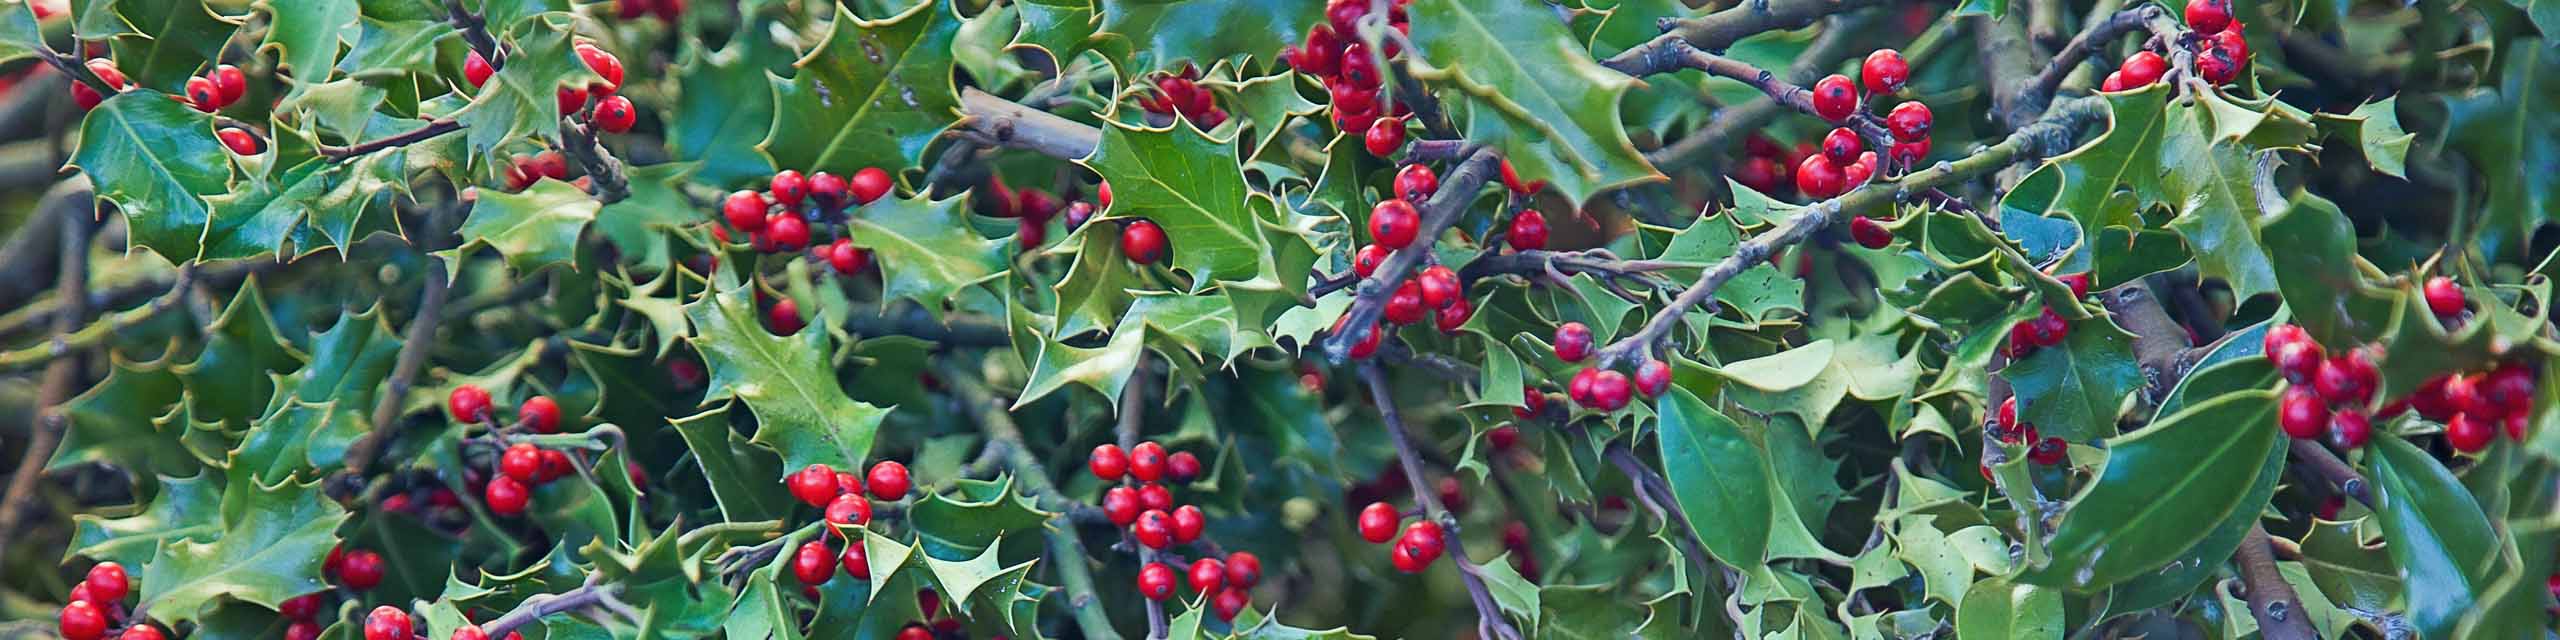 English holly leaves with red berries growing on live bush.